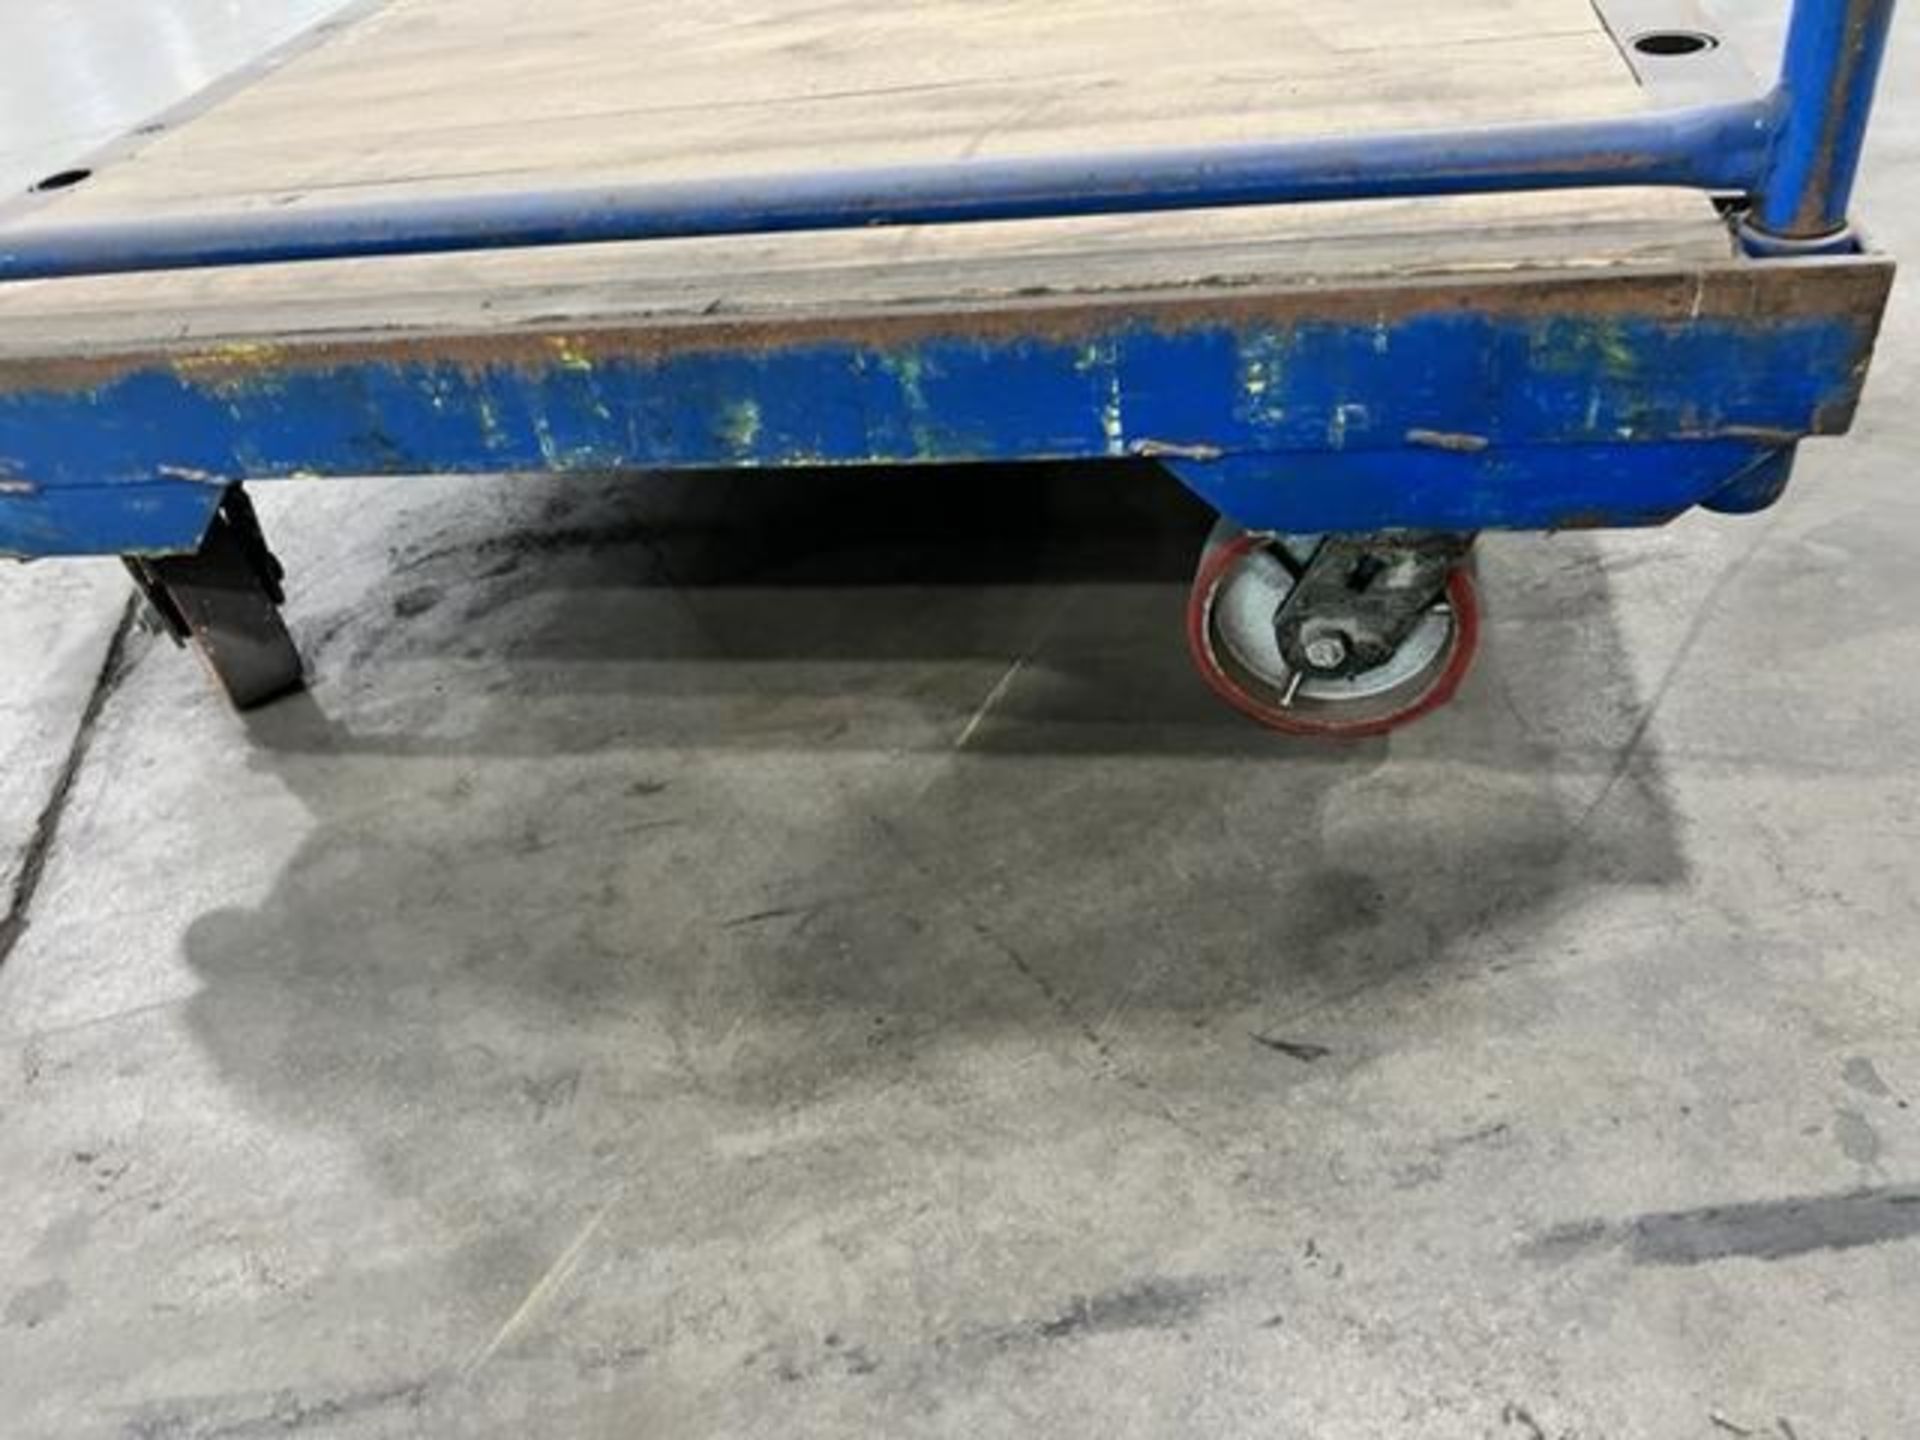 Blue Metal Material Carts w/ Wooden Floor ($5 Loading fee will be added to buyers invoice) - Image 4 of 4